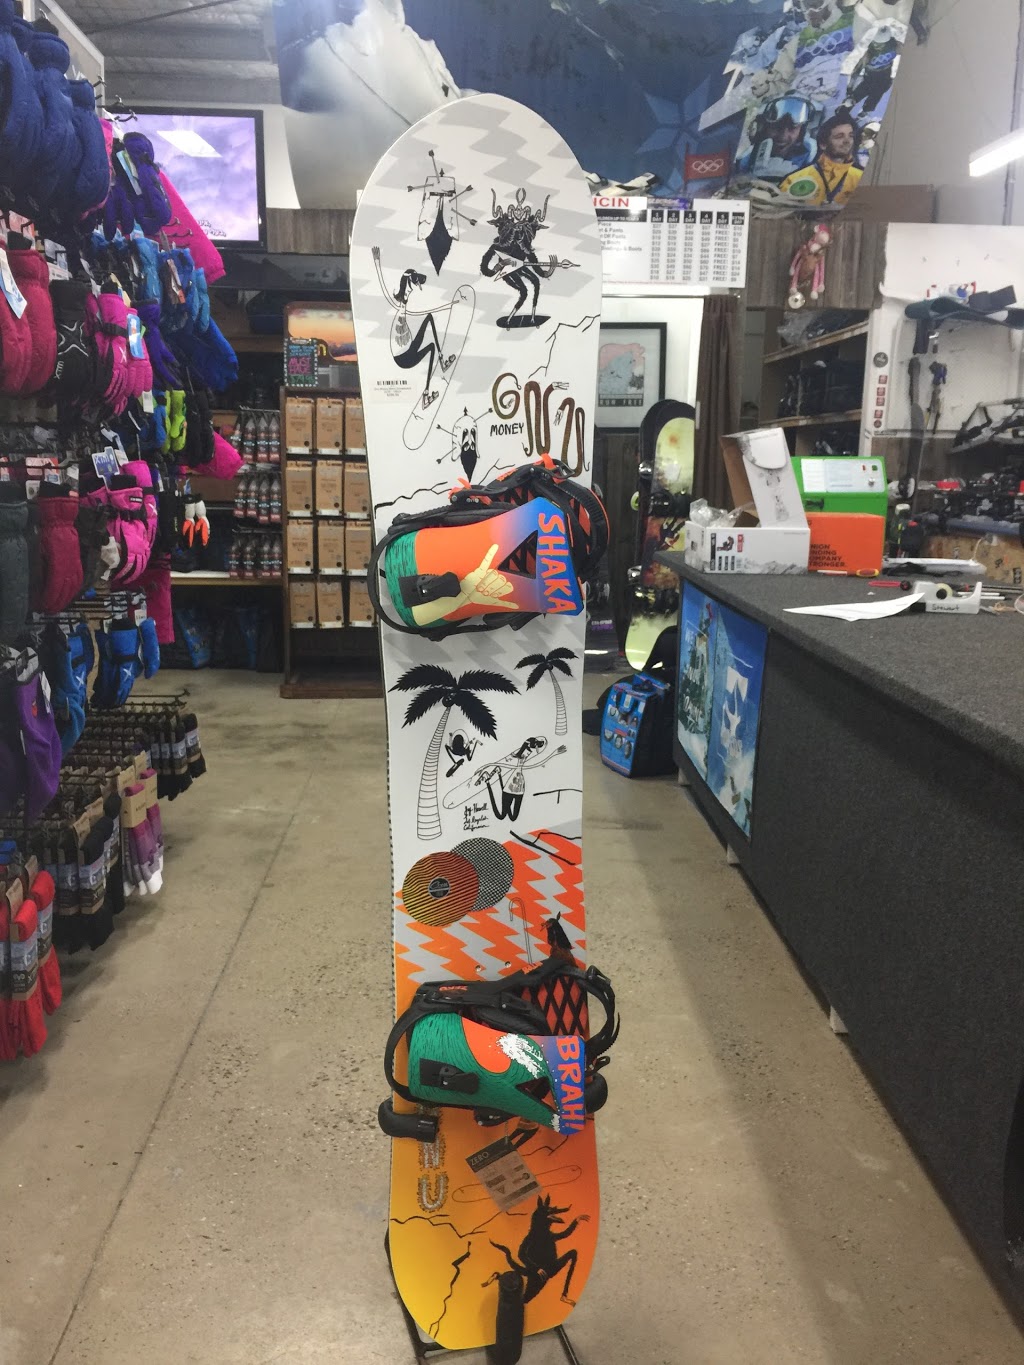 Oz Extreme Board Store - Geelong | clothing store | 4/147 Marshalltown Rd, Grovedale VIC 3216, Australia | 0352440111 OR +61 3 5244 0111